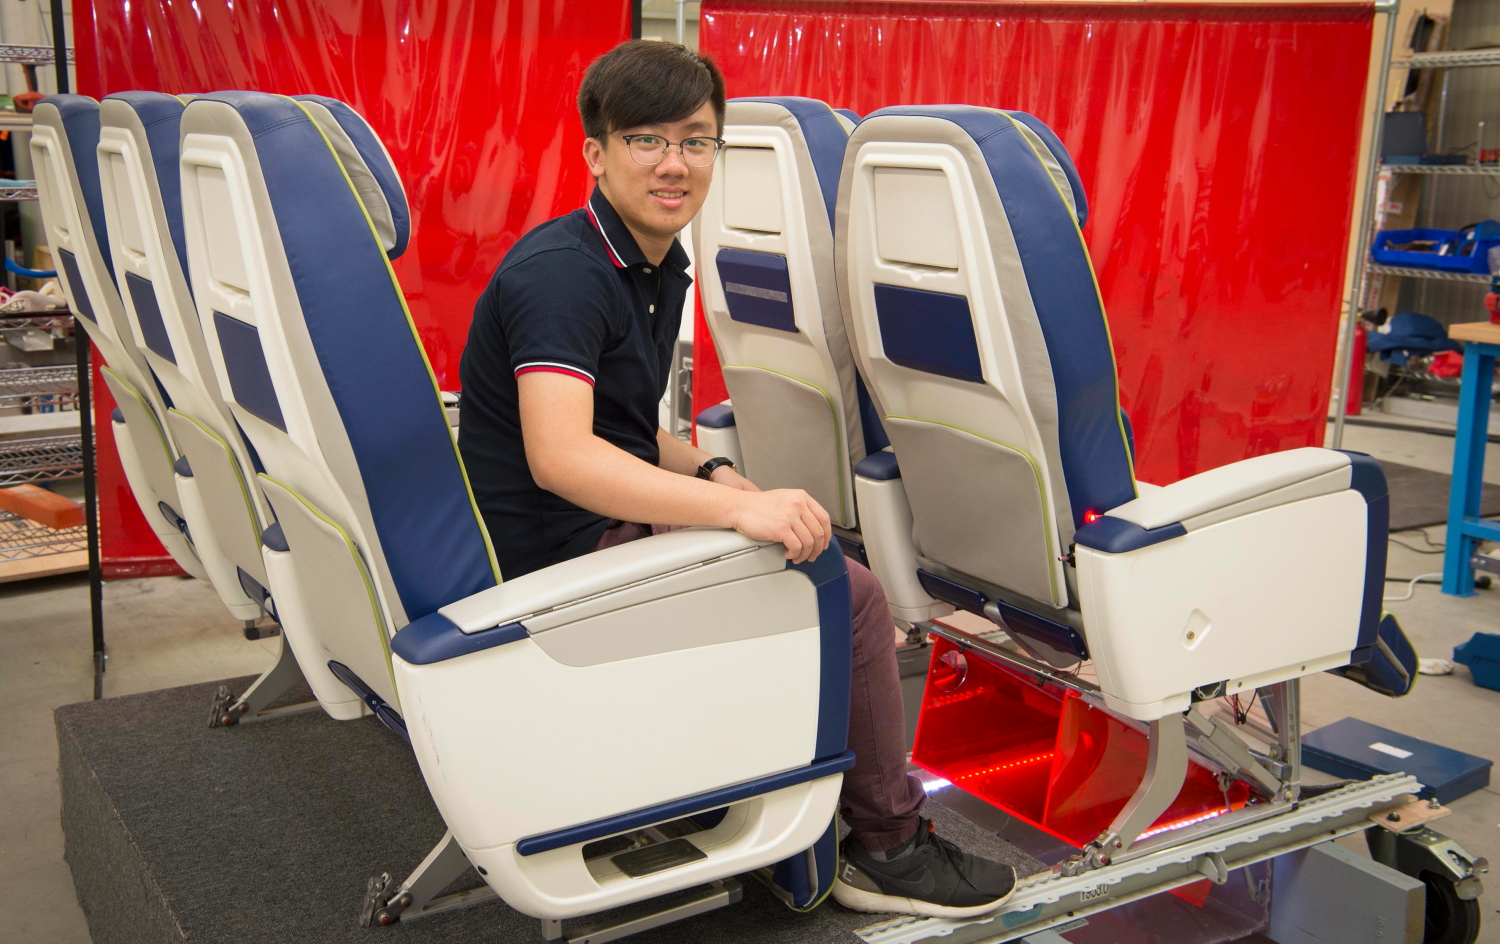 The new aircraft cabin design by Team DAELead from The University of Hong Kong fully utilizes the space between the cabin floor and the cargo ceiling to give the passengers their own personal luggage space beanth the seat in front of them.